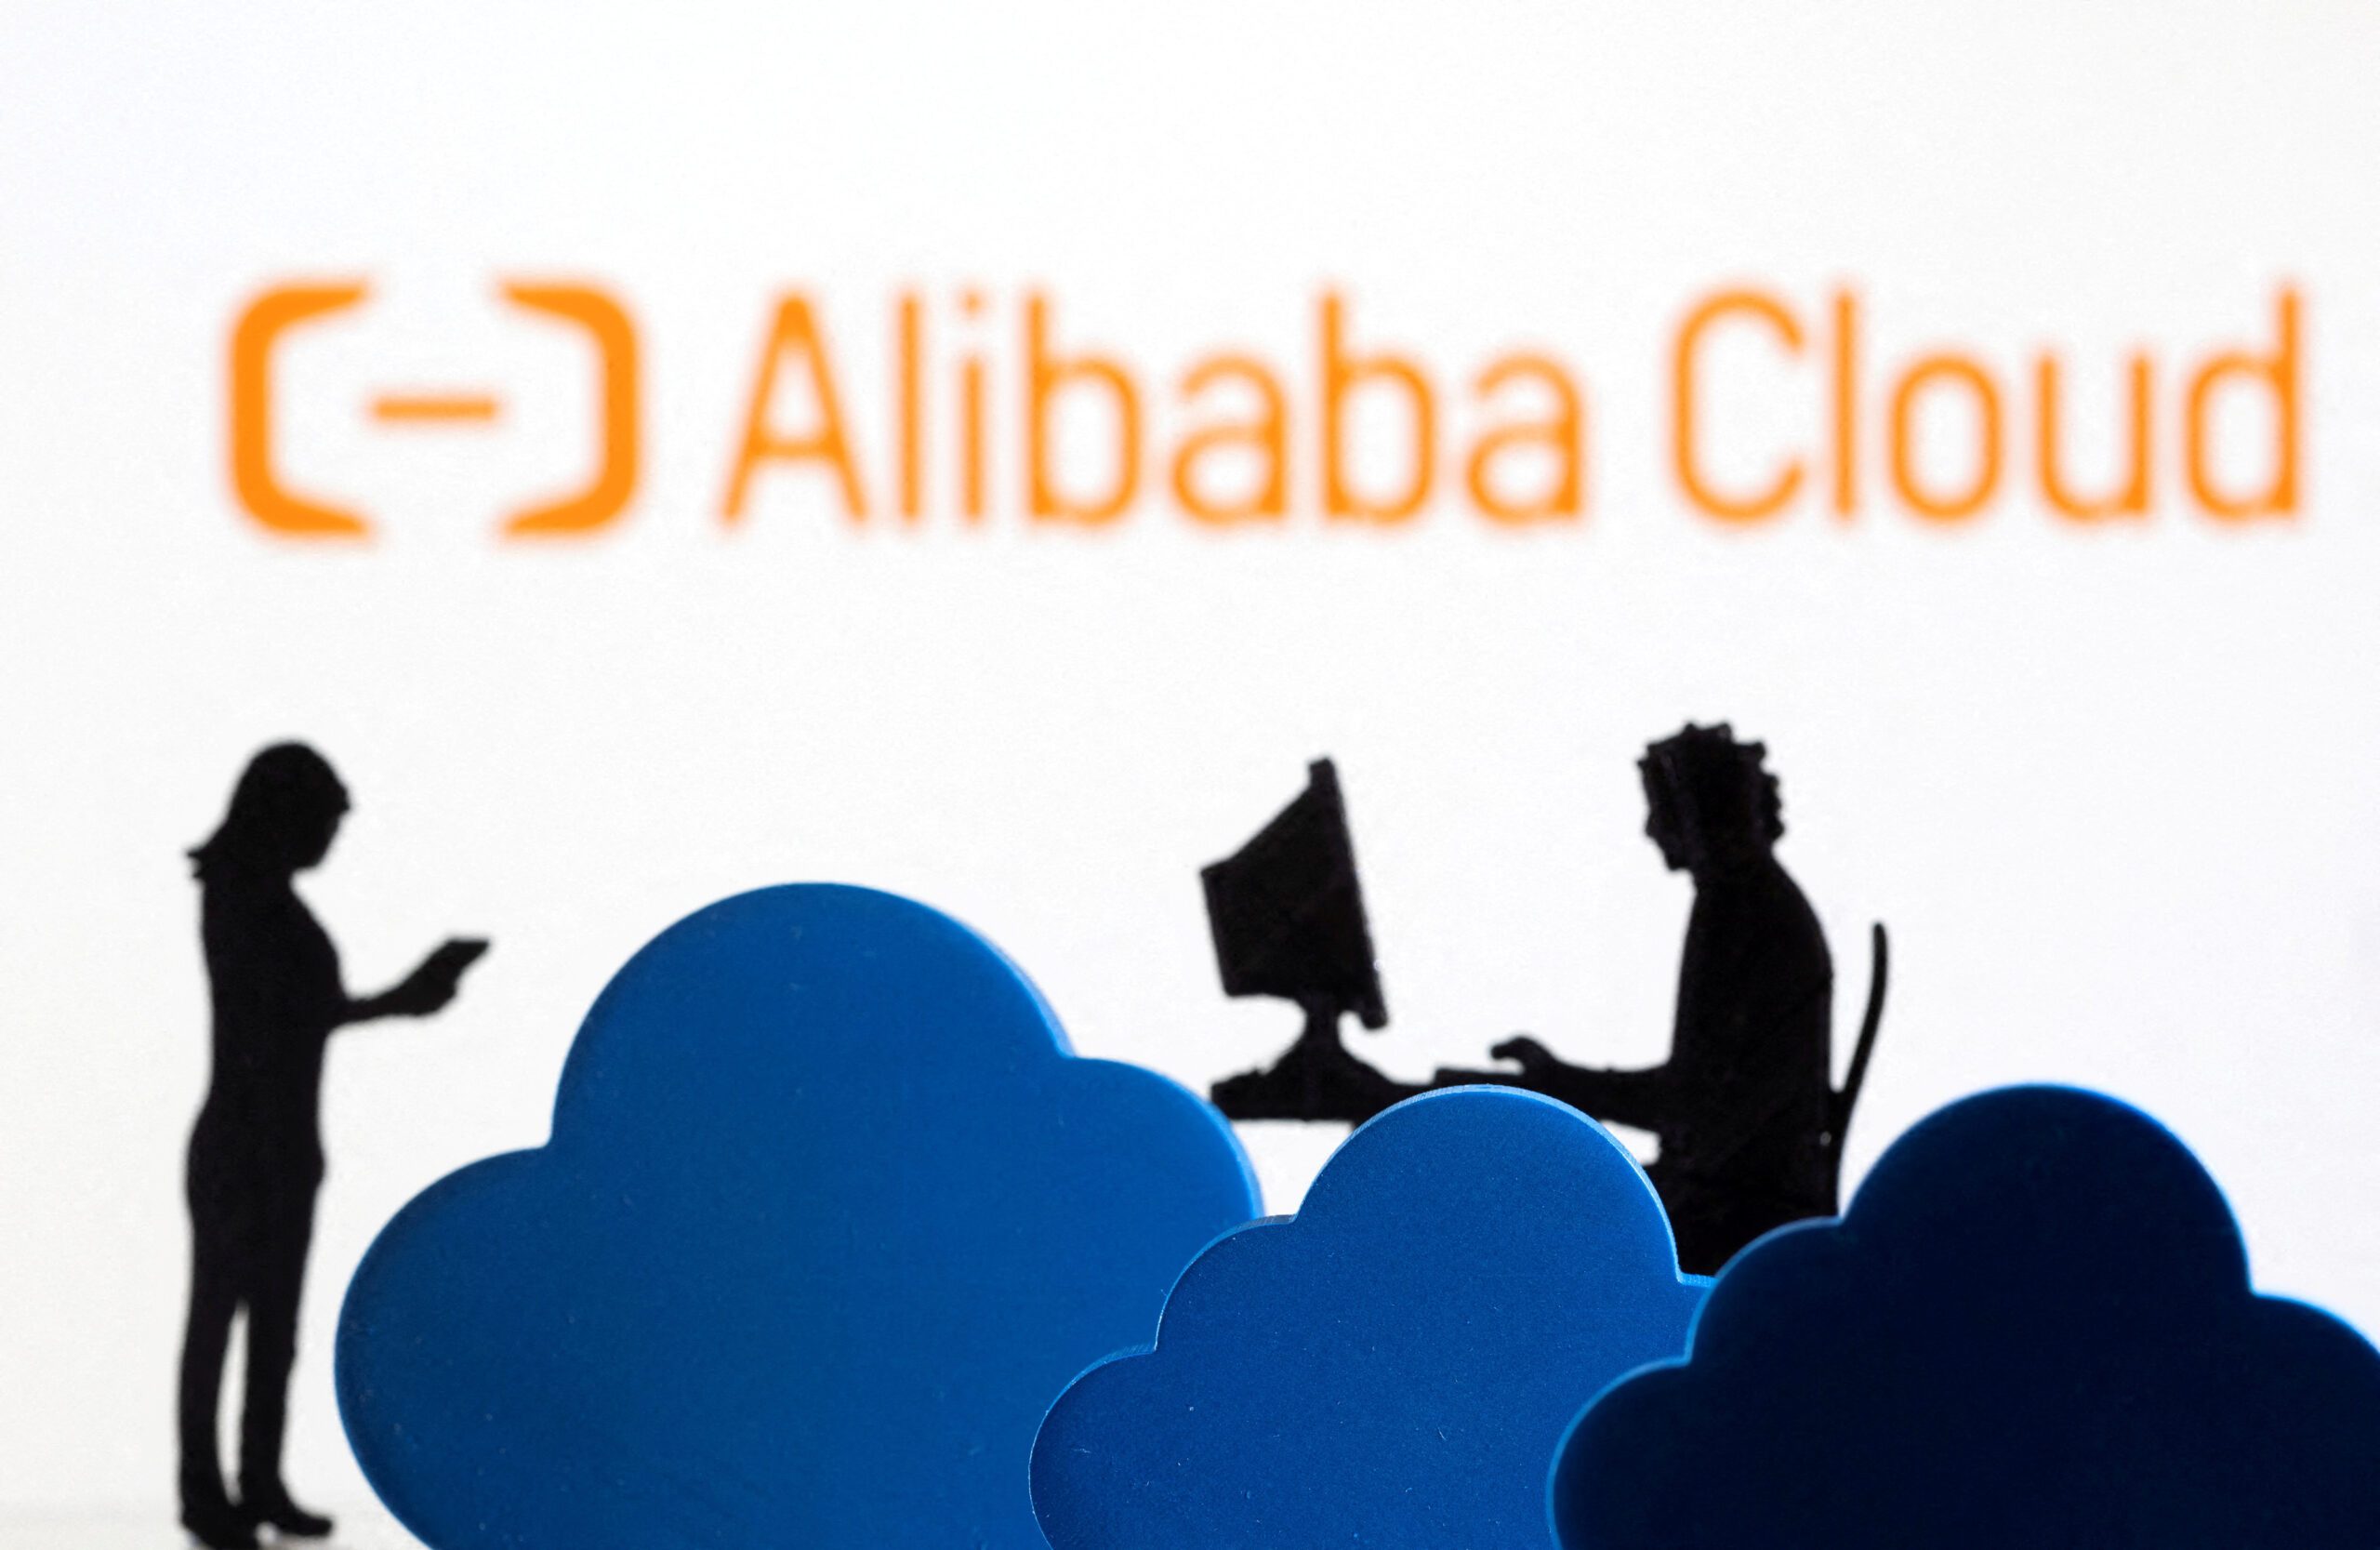 China's Alibaba Cloud announces price cut on products powered by offshore data centres